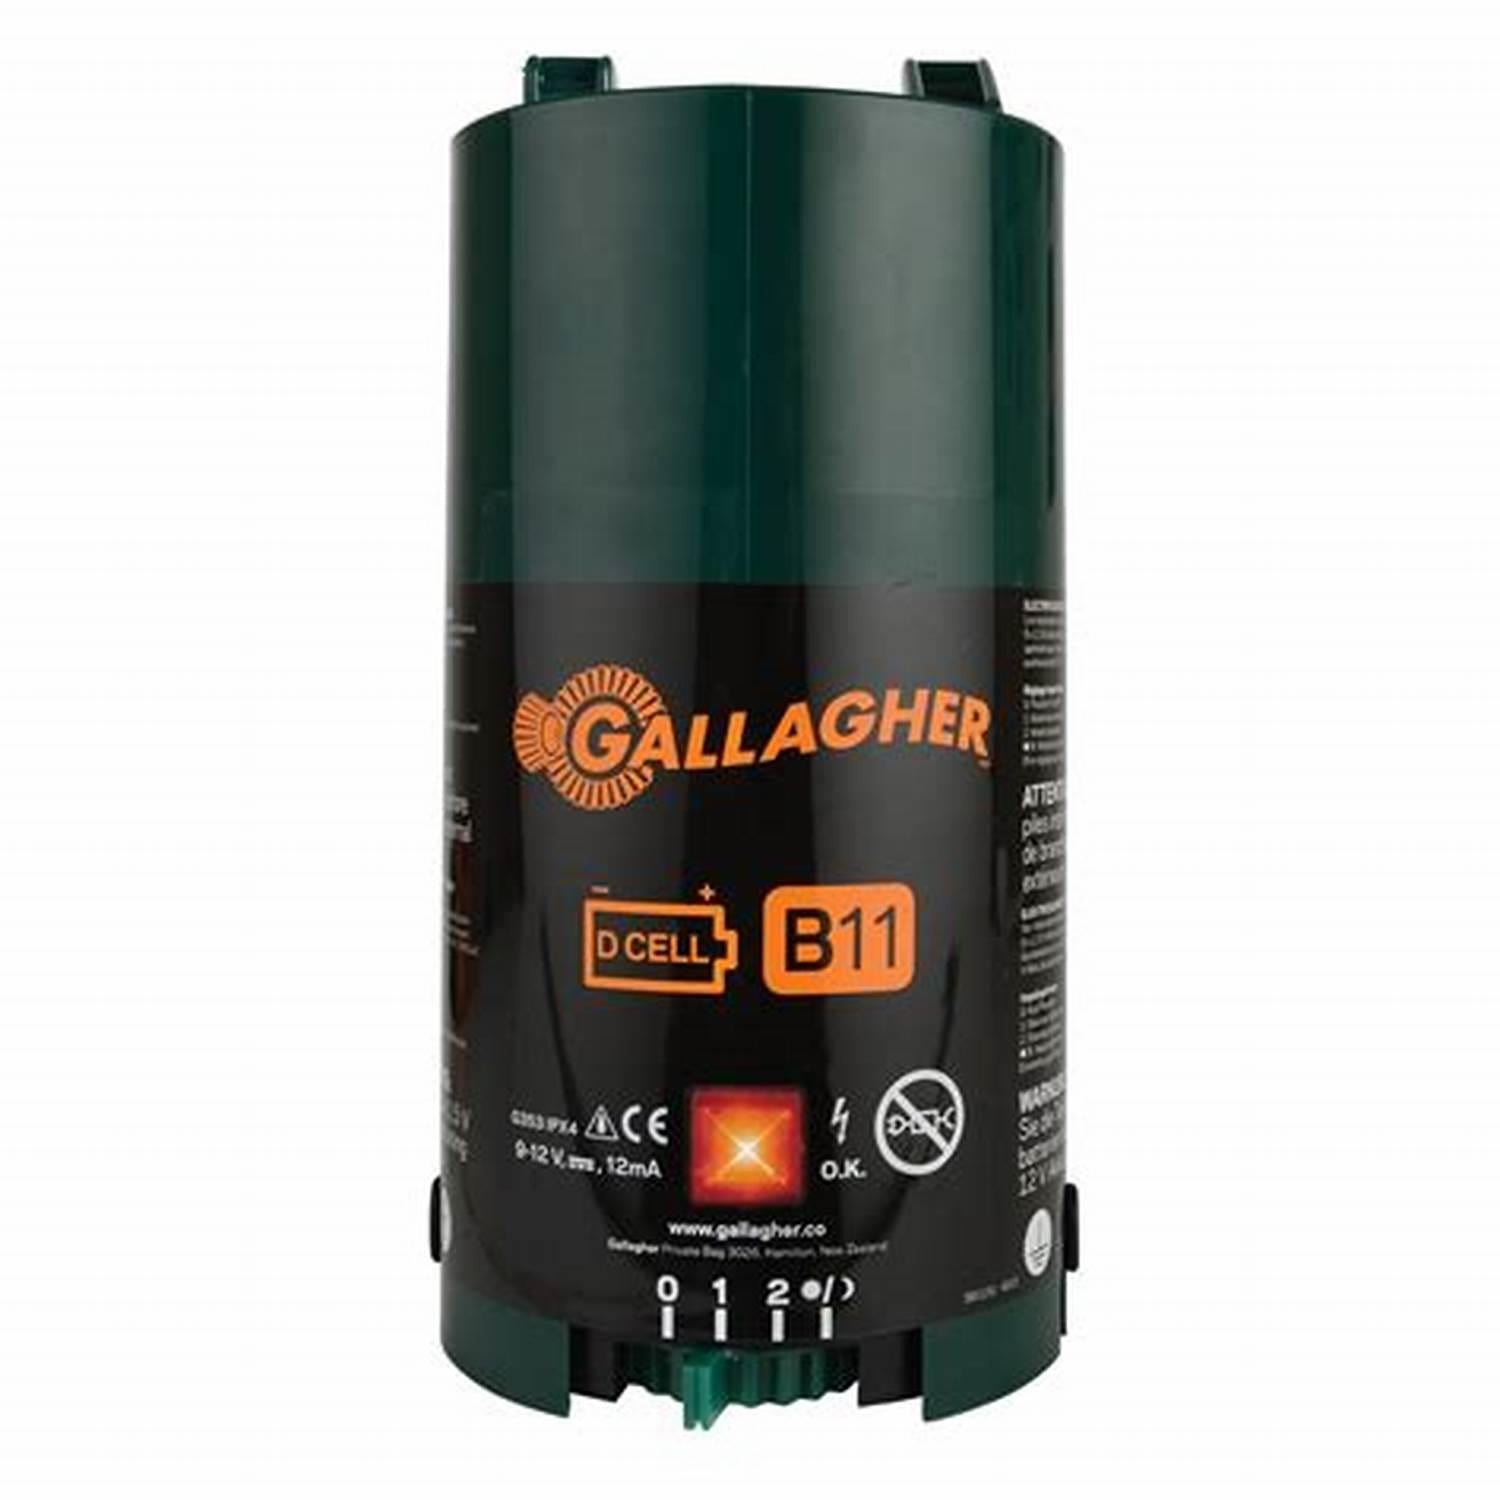 Gallagher G36311 B10 6 Acres Battery Fence Charger